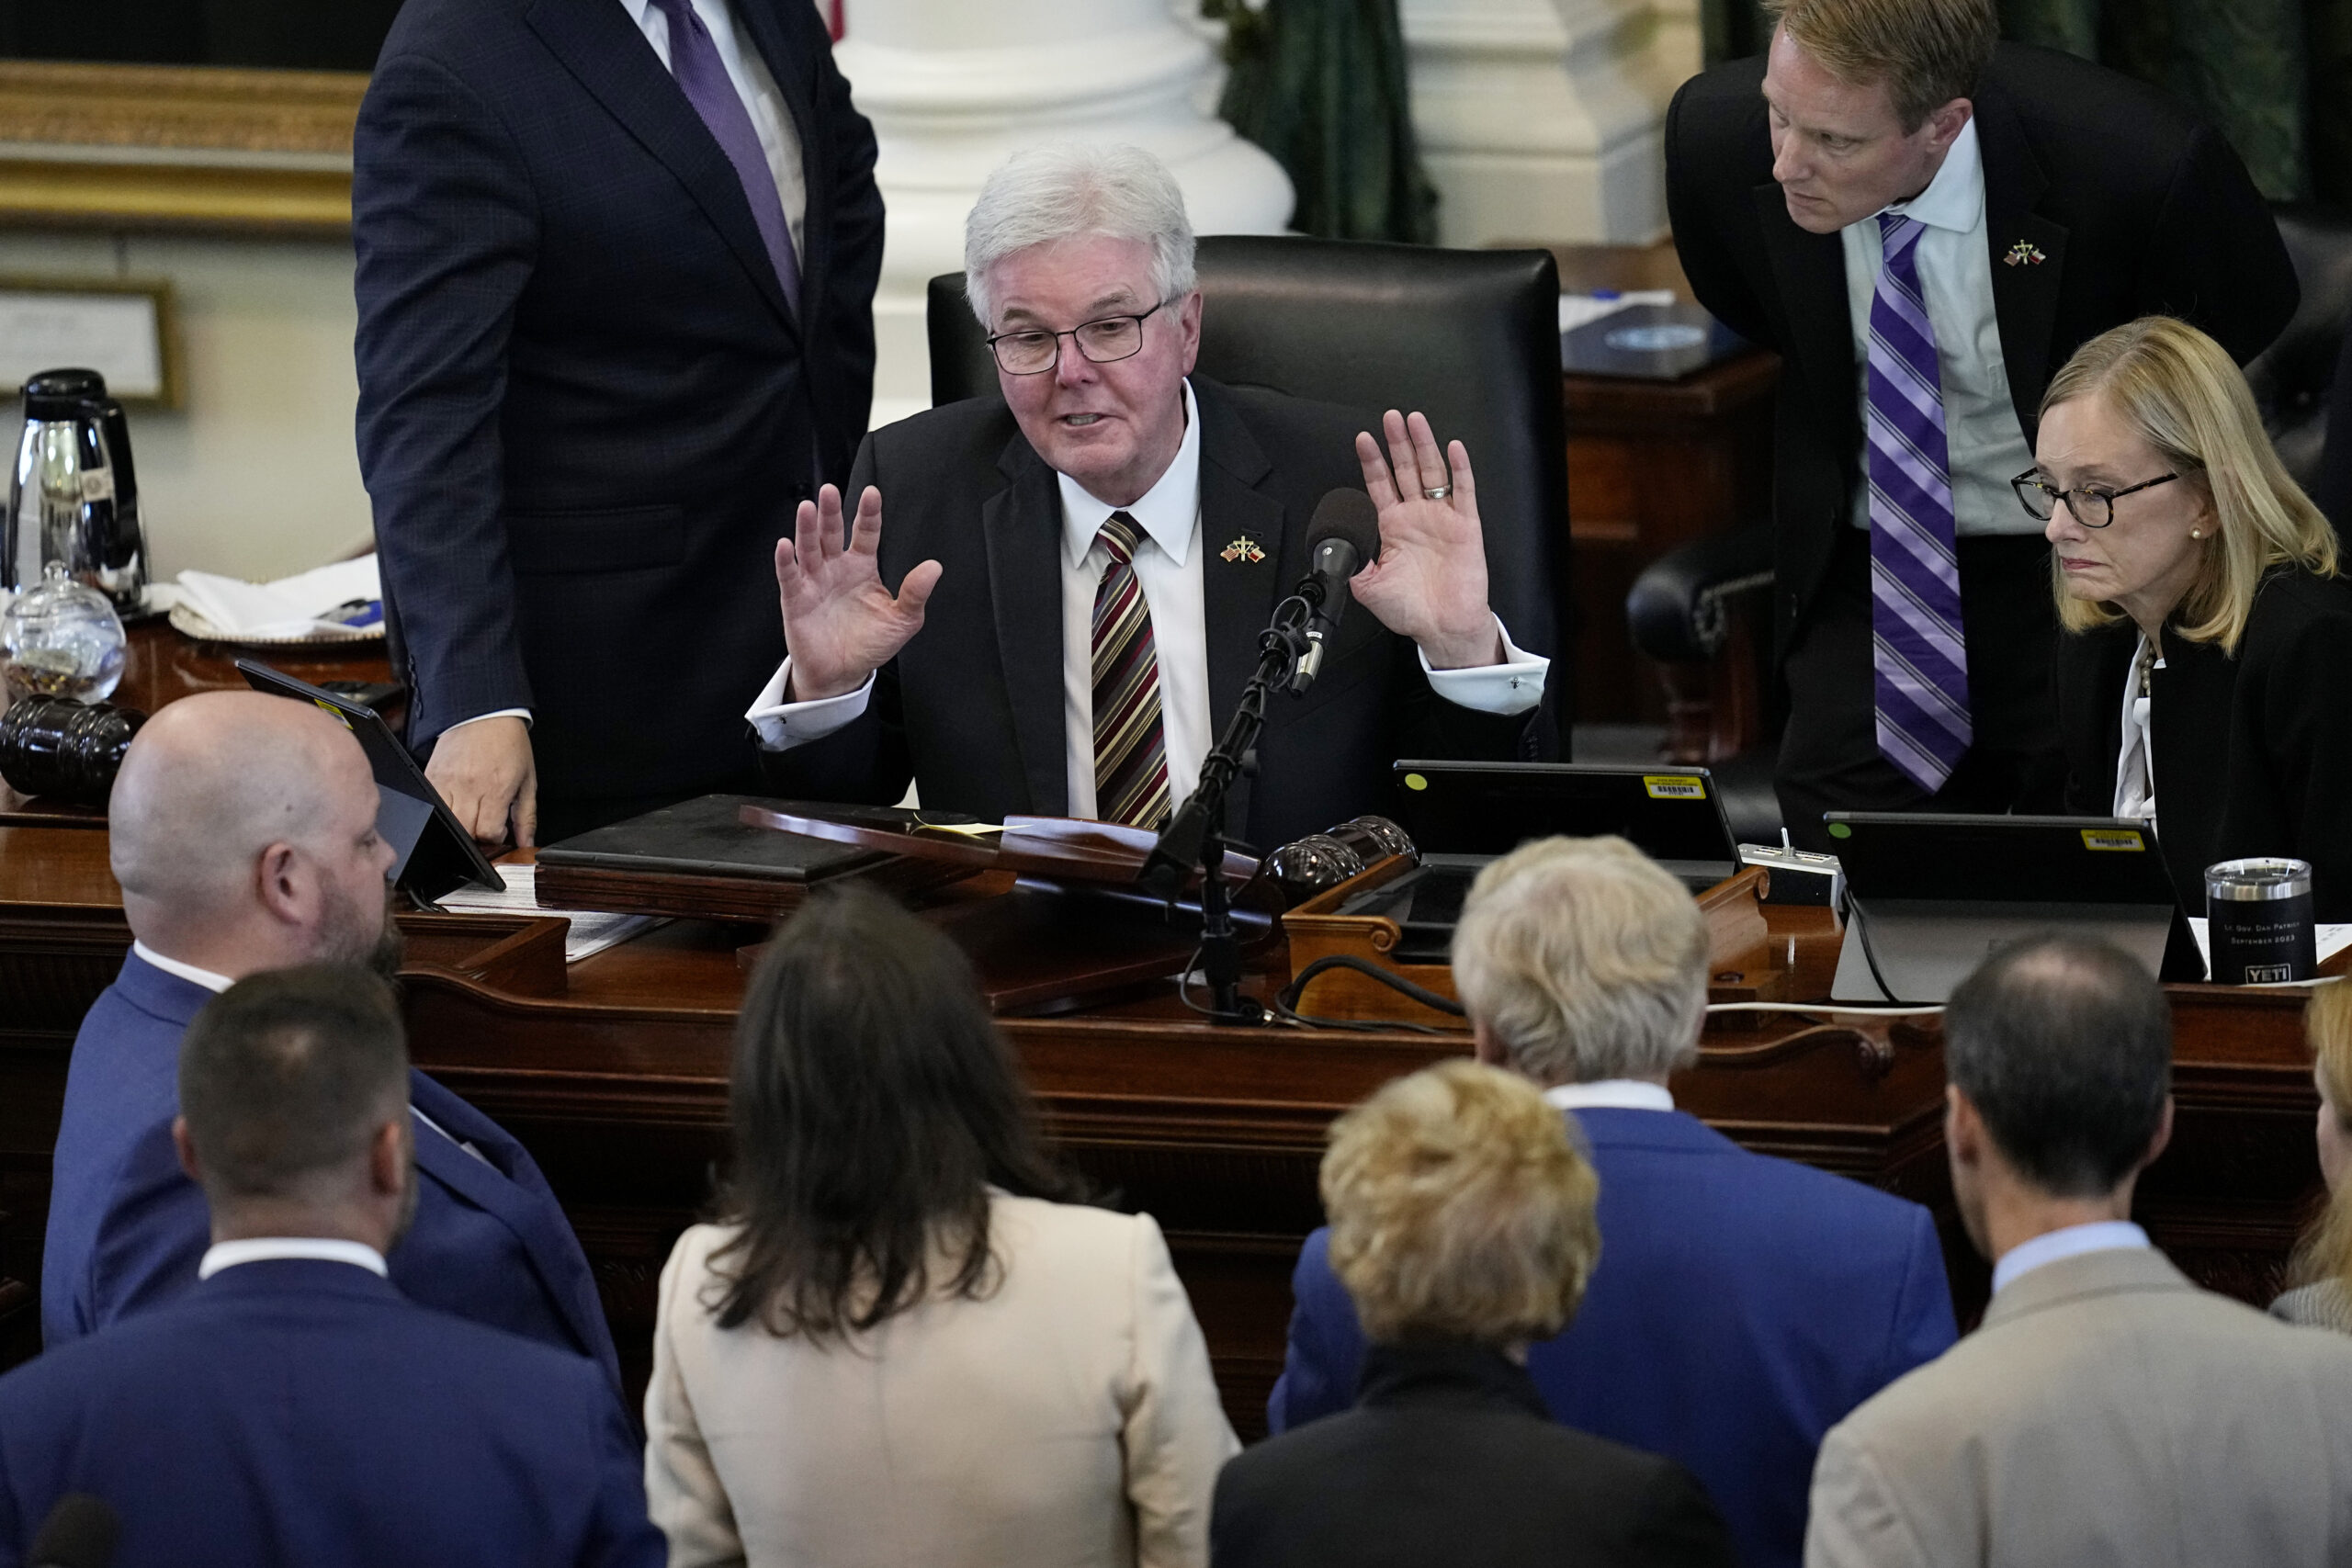 Texas Lt. Gov. Dan Patrick, center, throws up his hands as he talks with defense and prosecution counsel during the impeachment trial for suspended Texas Attorney General Ken Paxton in the Senate Chamber at the Texas Capitol, Thursday, Sept. 14, 2023, in Austin, Texas. (AP Photo/Eric Gay)